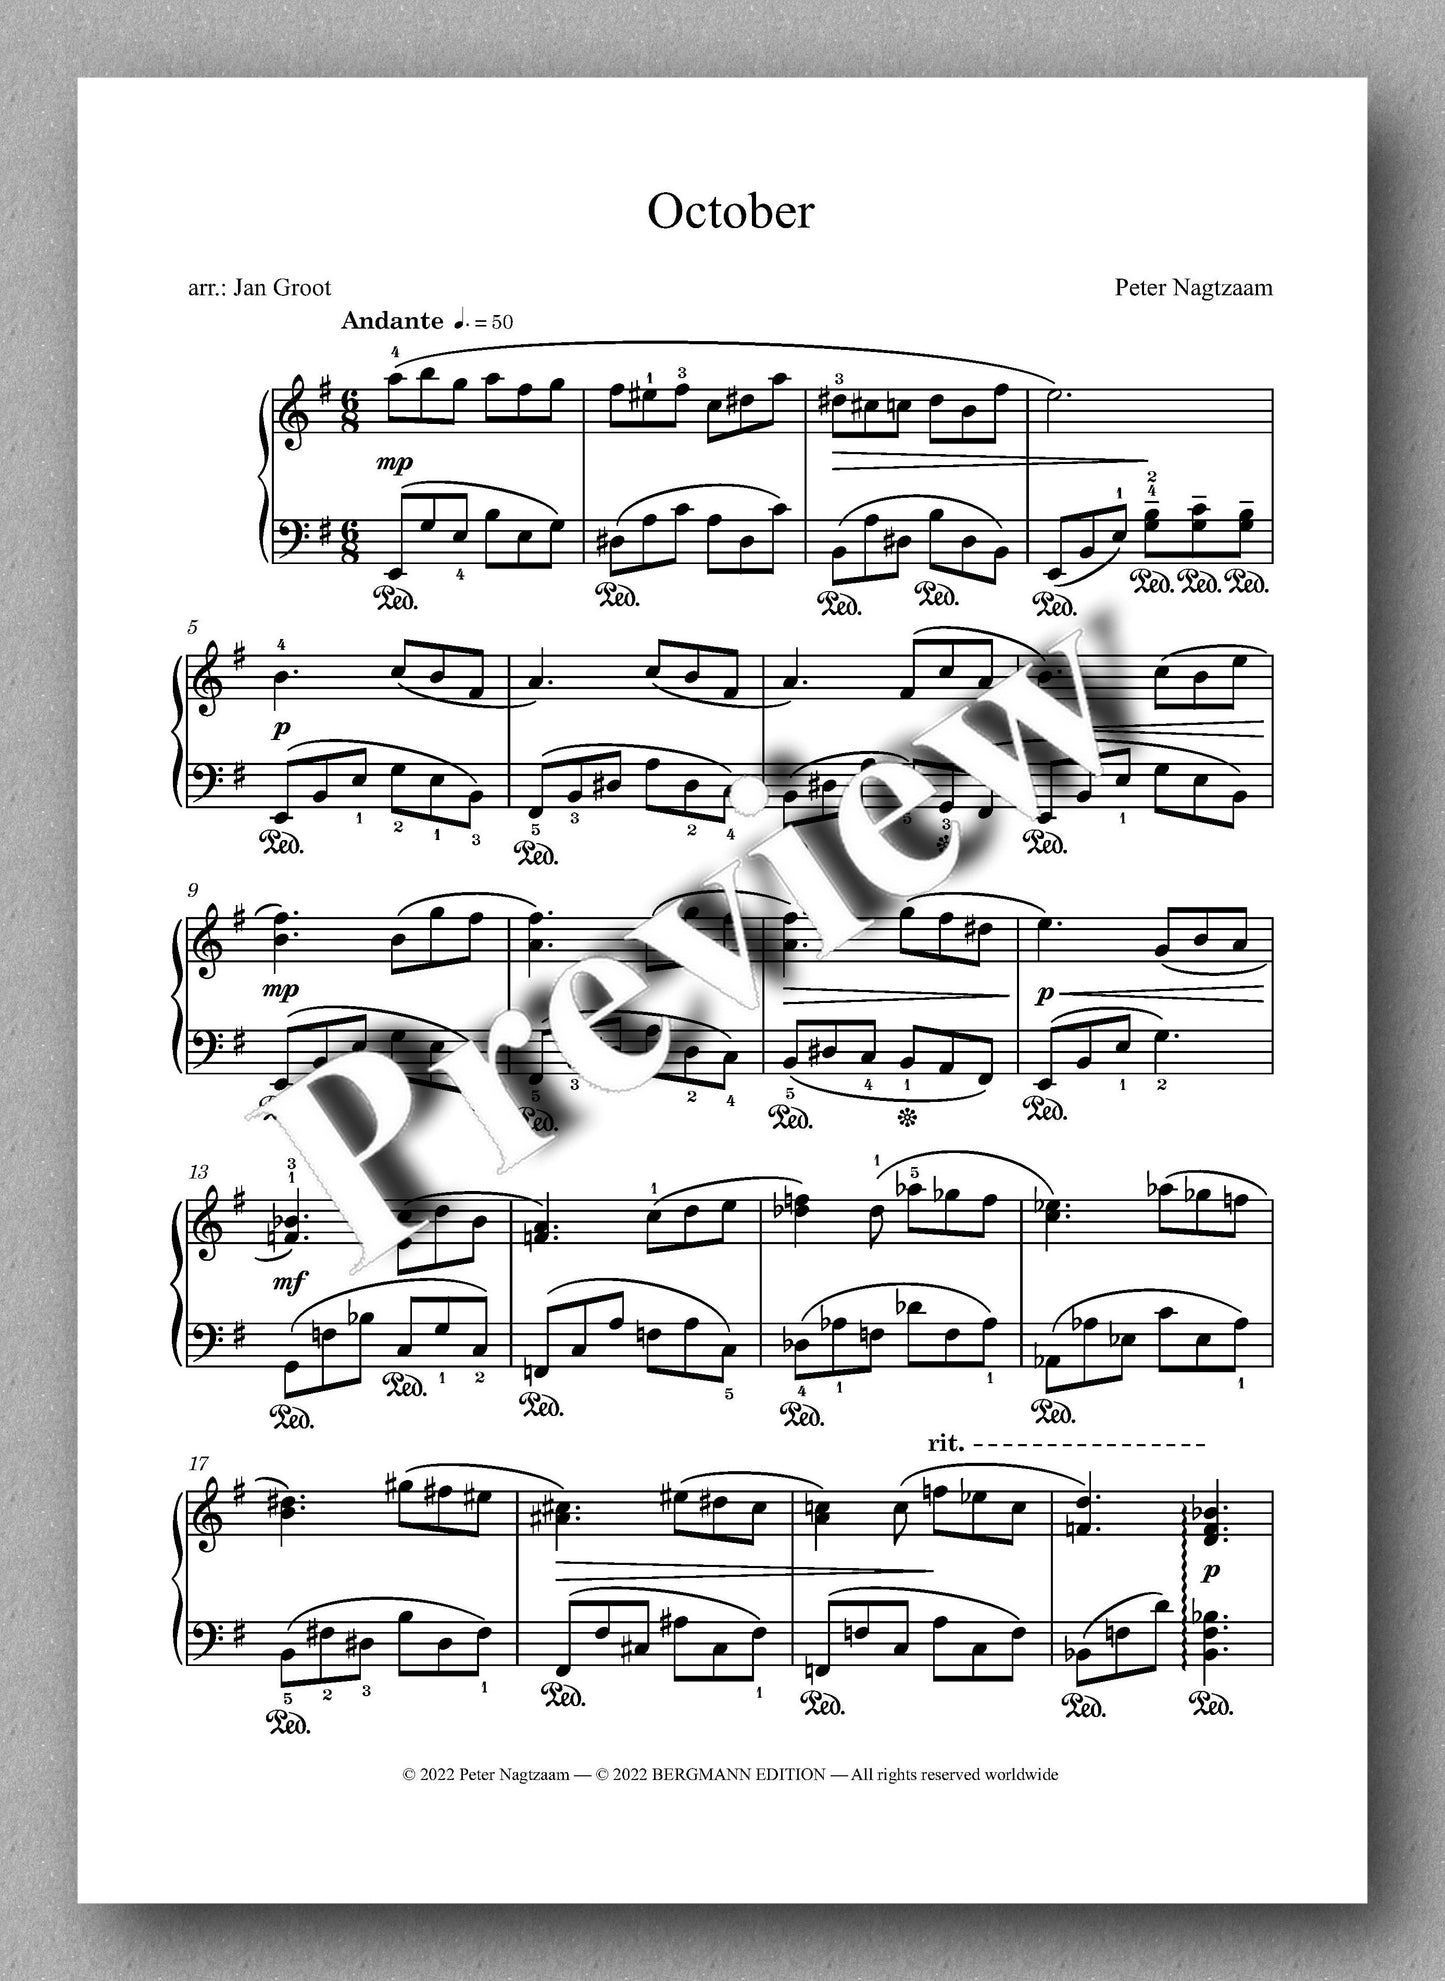 Peter Nagtzaam, October - piano version - preview of the  music score